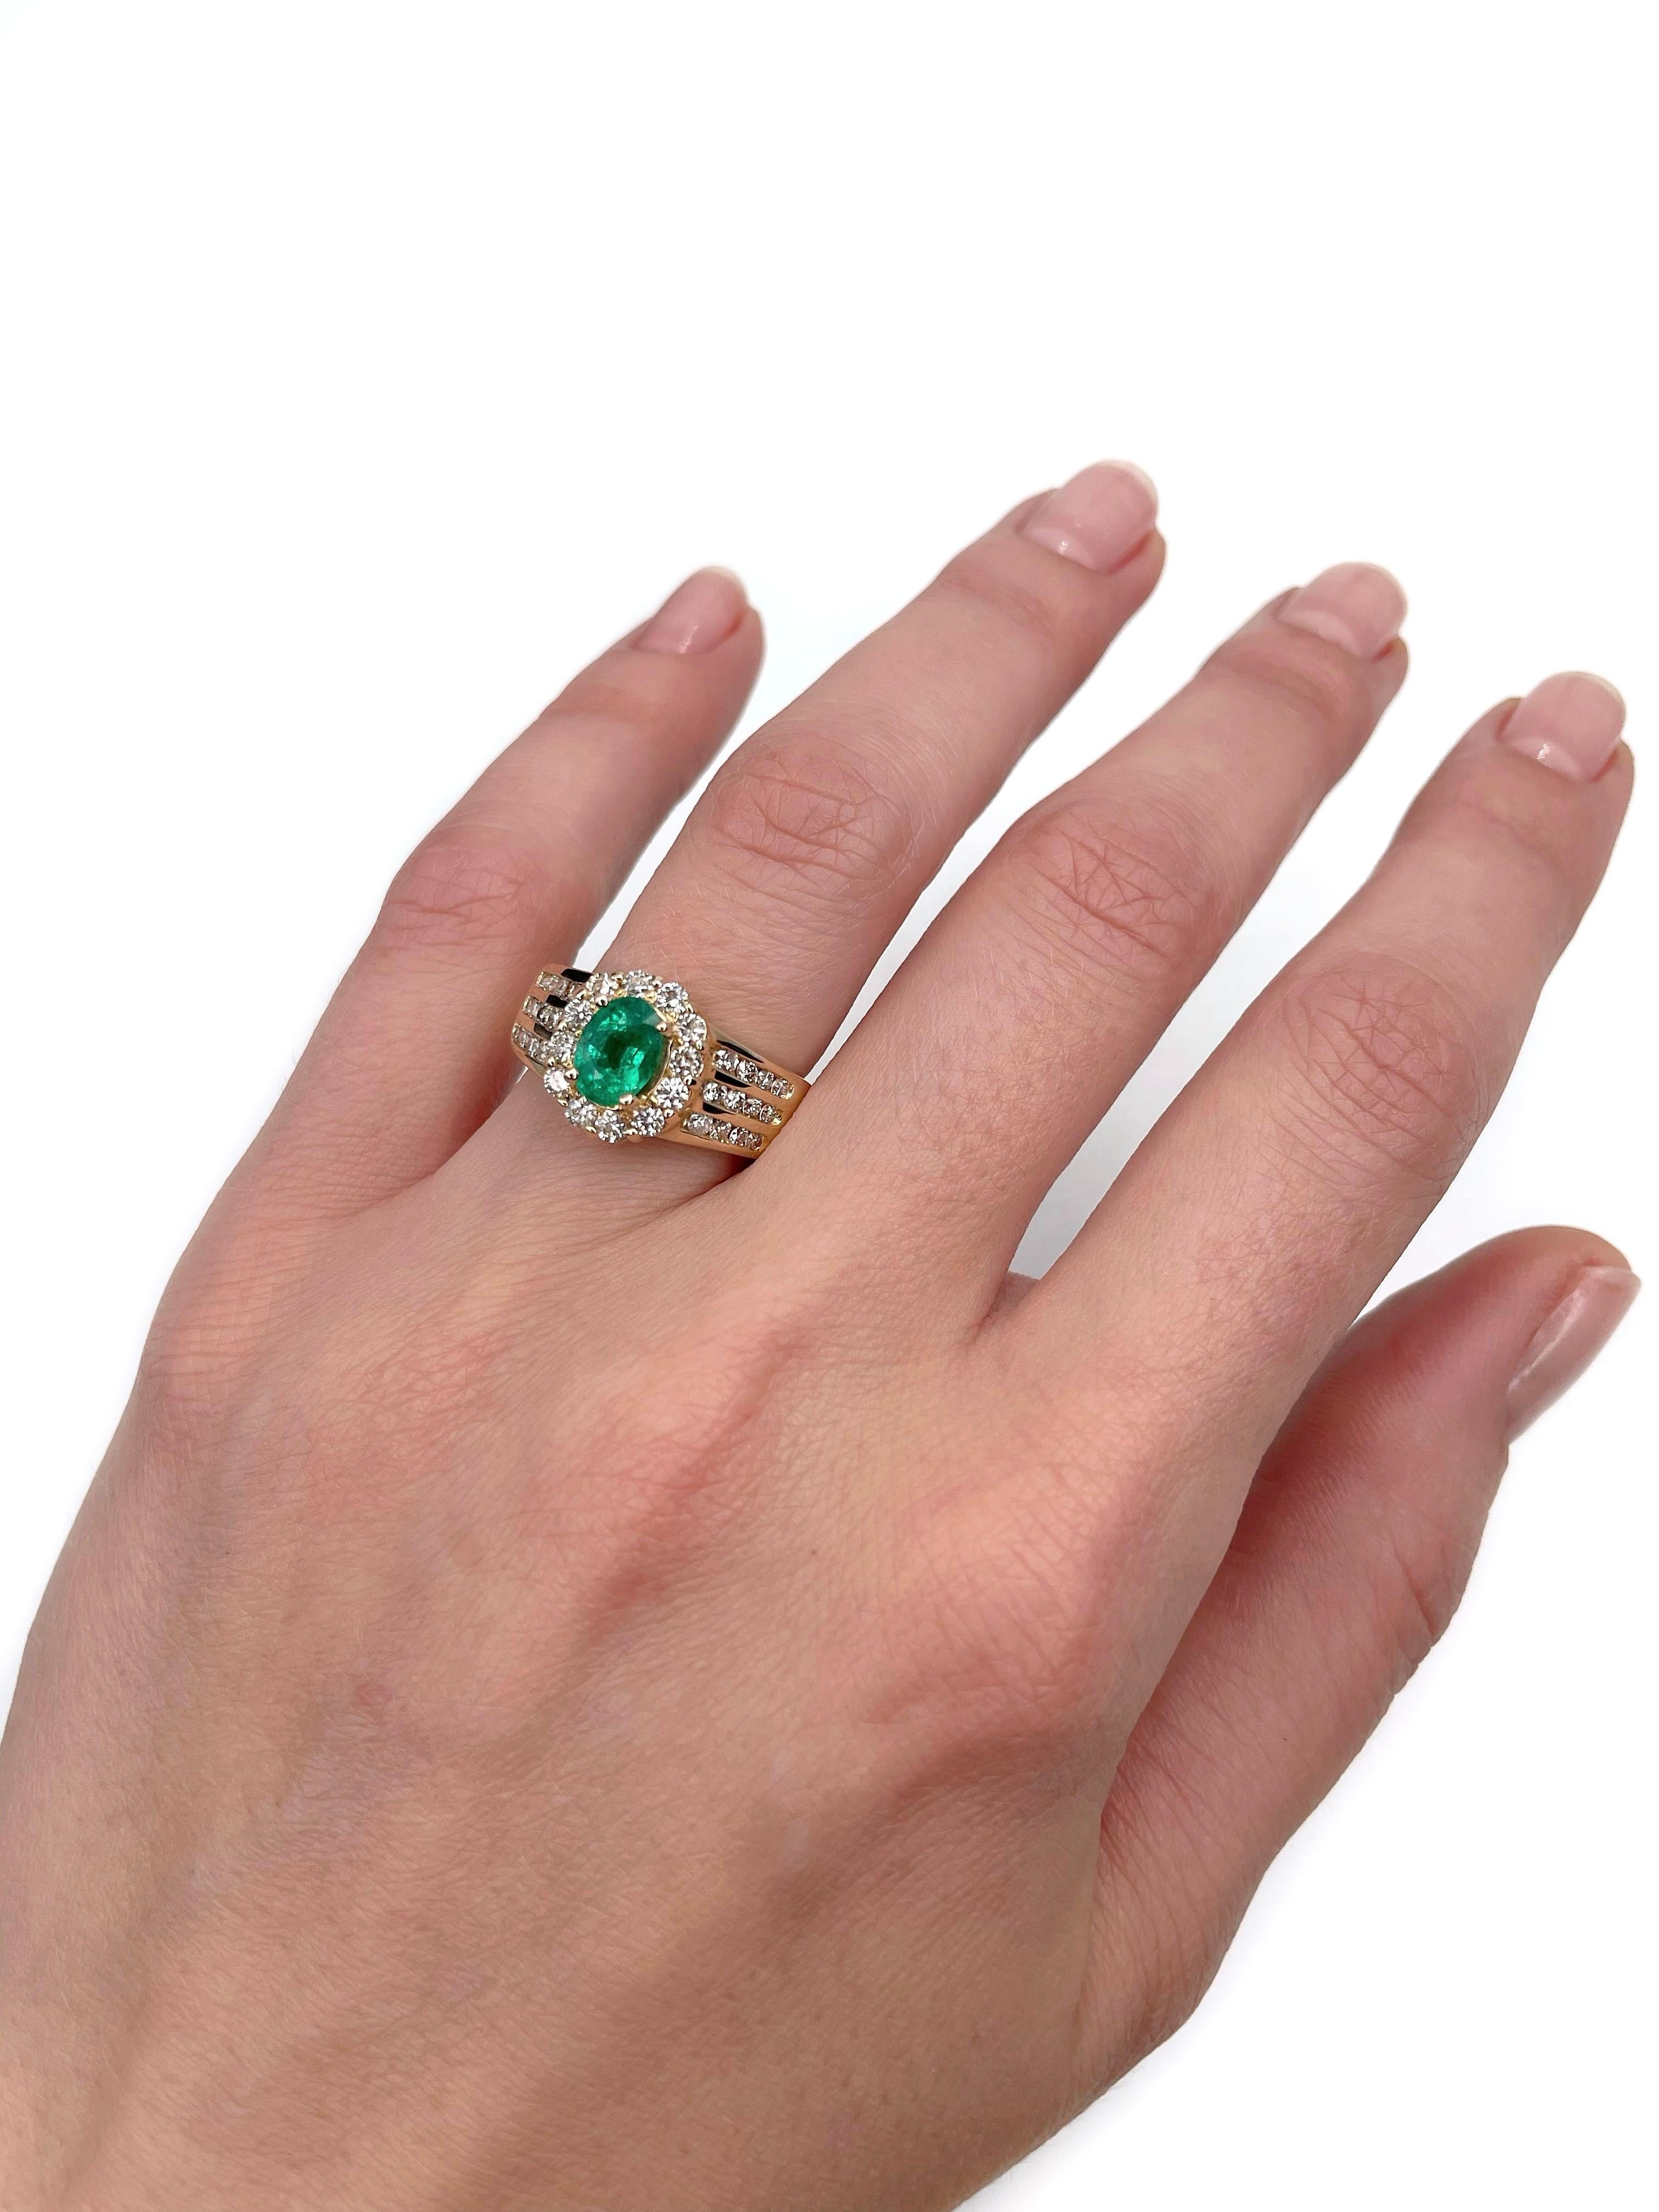 This is a lovely vintage cluster ring crafted in 14K slightly yellow gold. Circa 1980. 

The piece features:
- 1 emerald: oval cut, 0.90ct, vslbG 5/4, P1
- 36 diamonds: round brilliant cut, TW 0.85ct, RW-W, VS-SI. 

Weight: 6.74g
Size: 17 (US